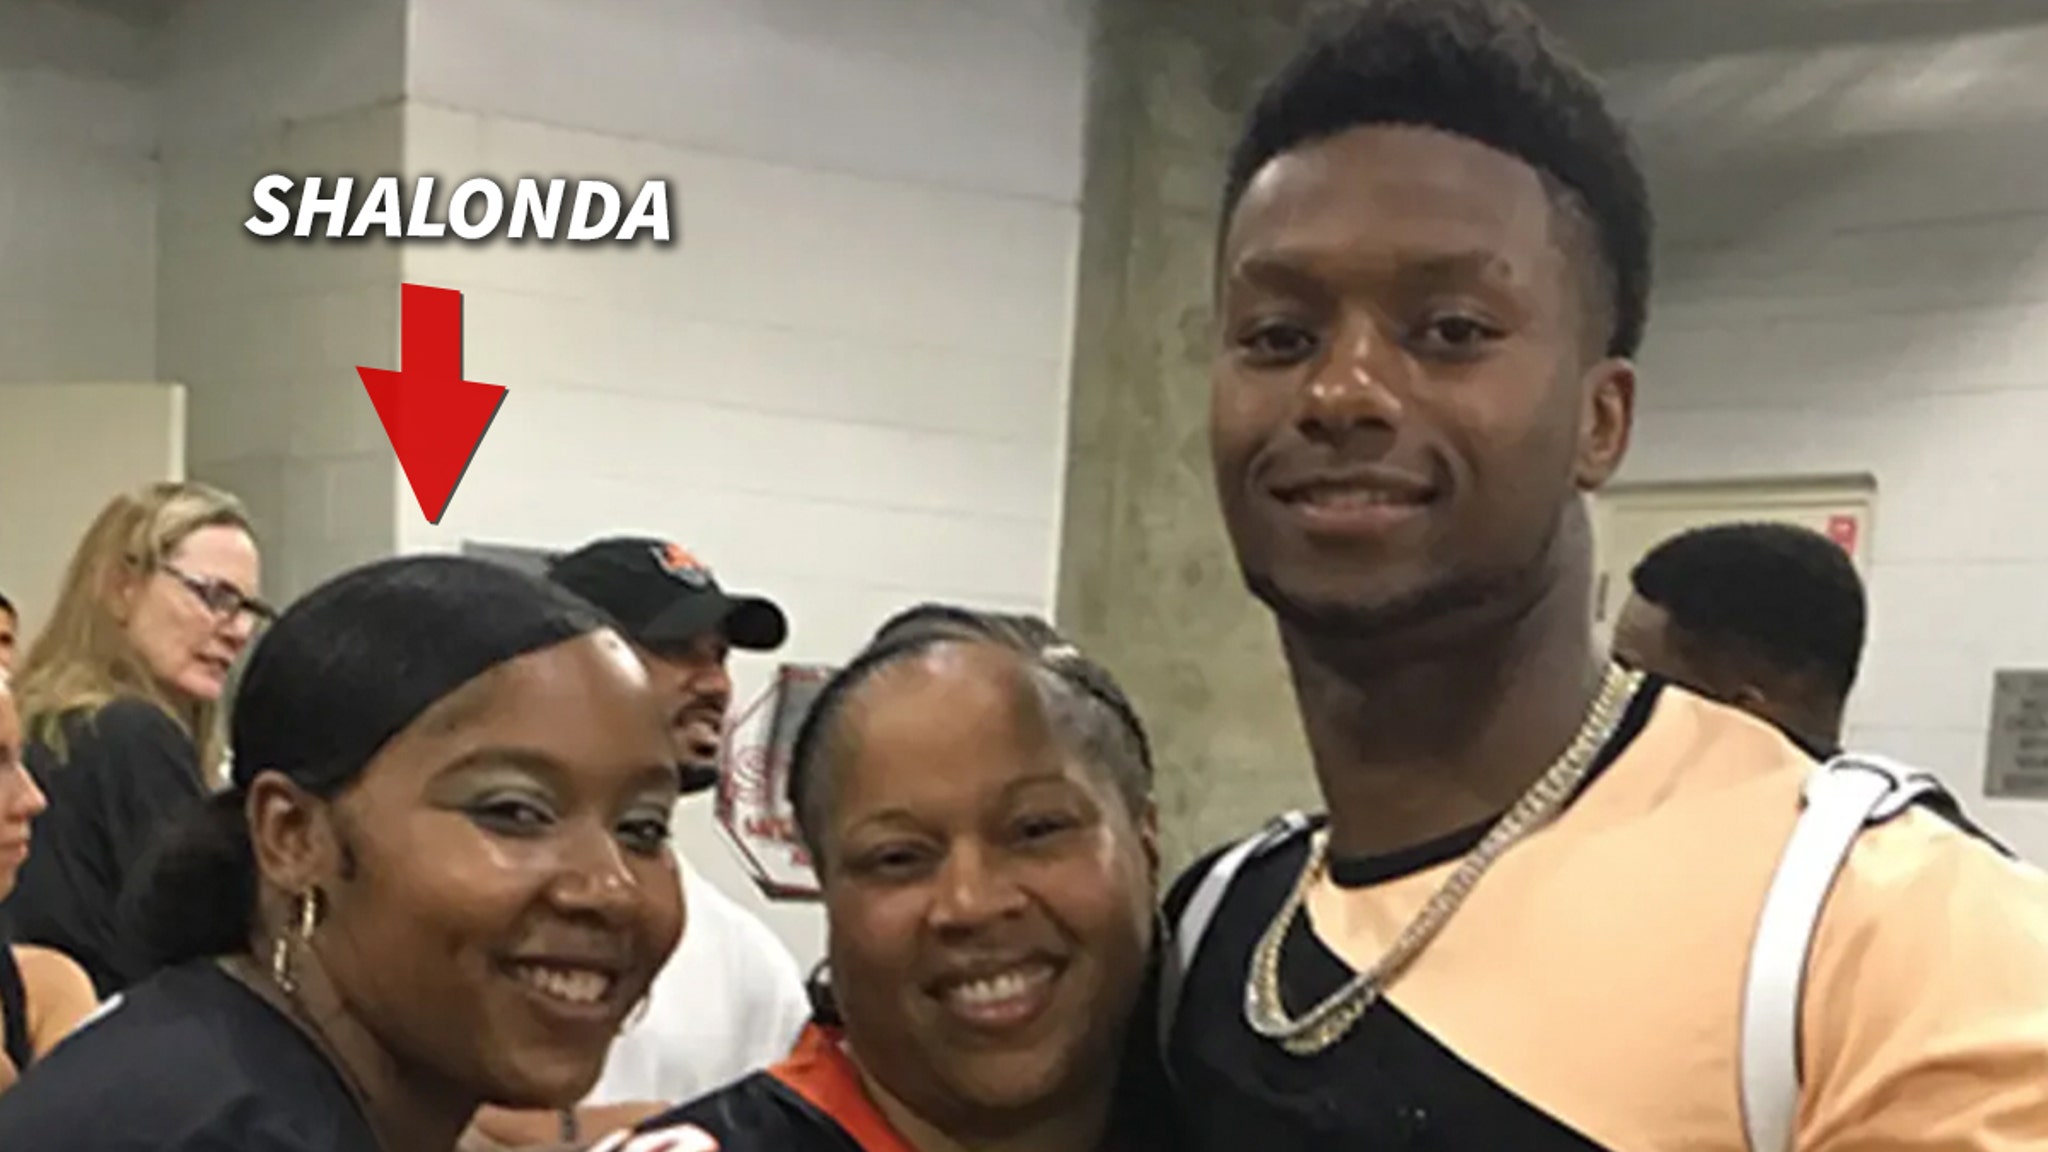 Joe Mixon’s Sister Named As Suspect In Shooting Incident At NFL Star’s Home